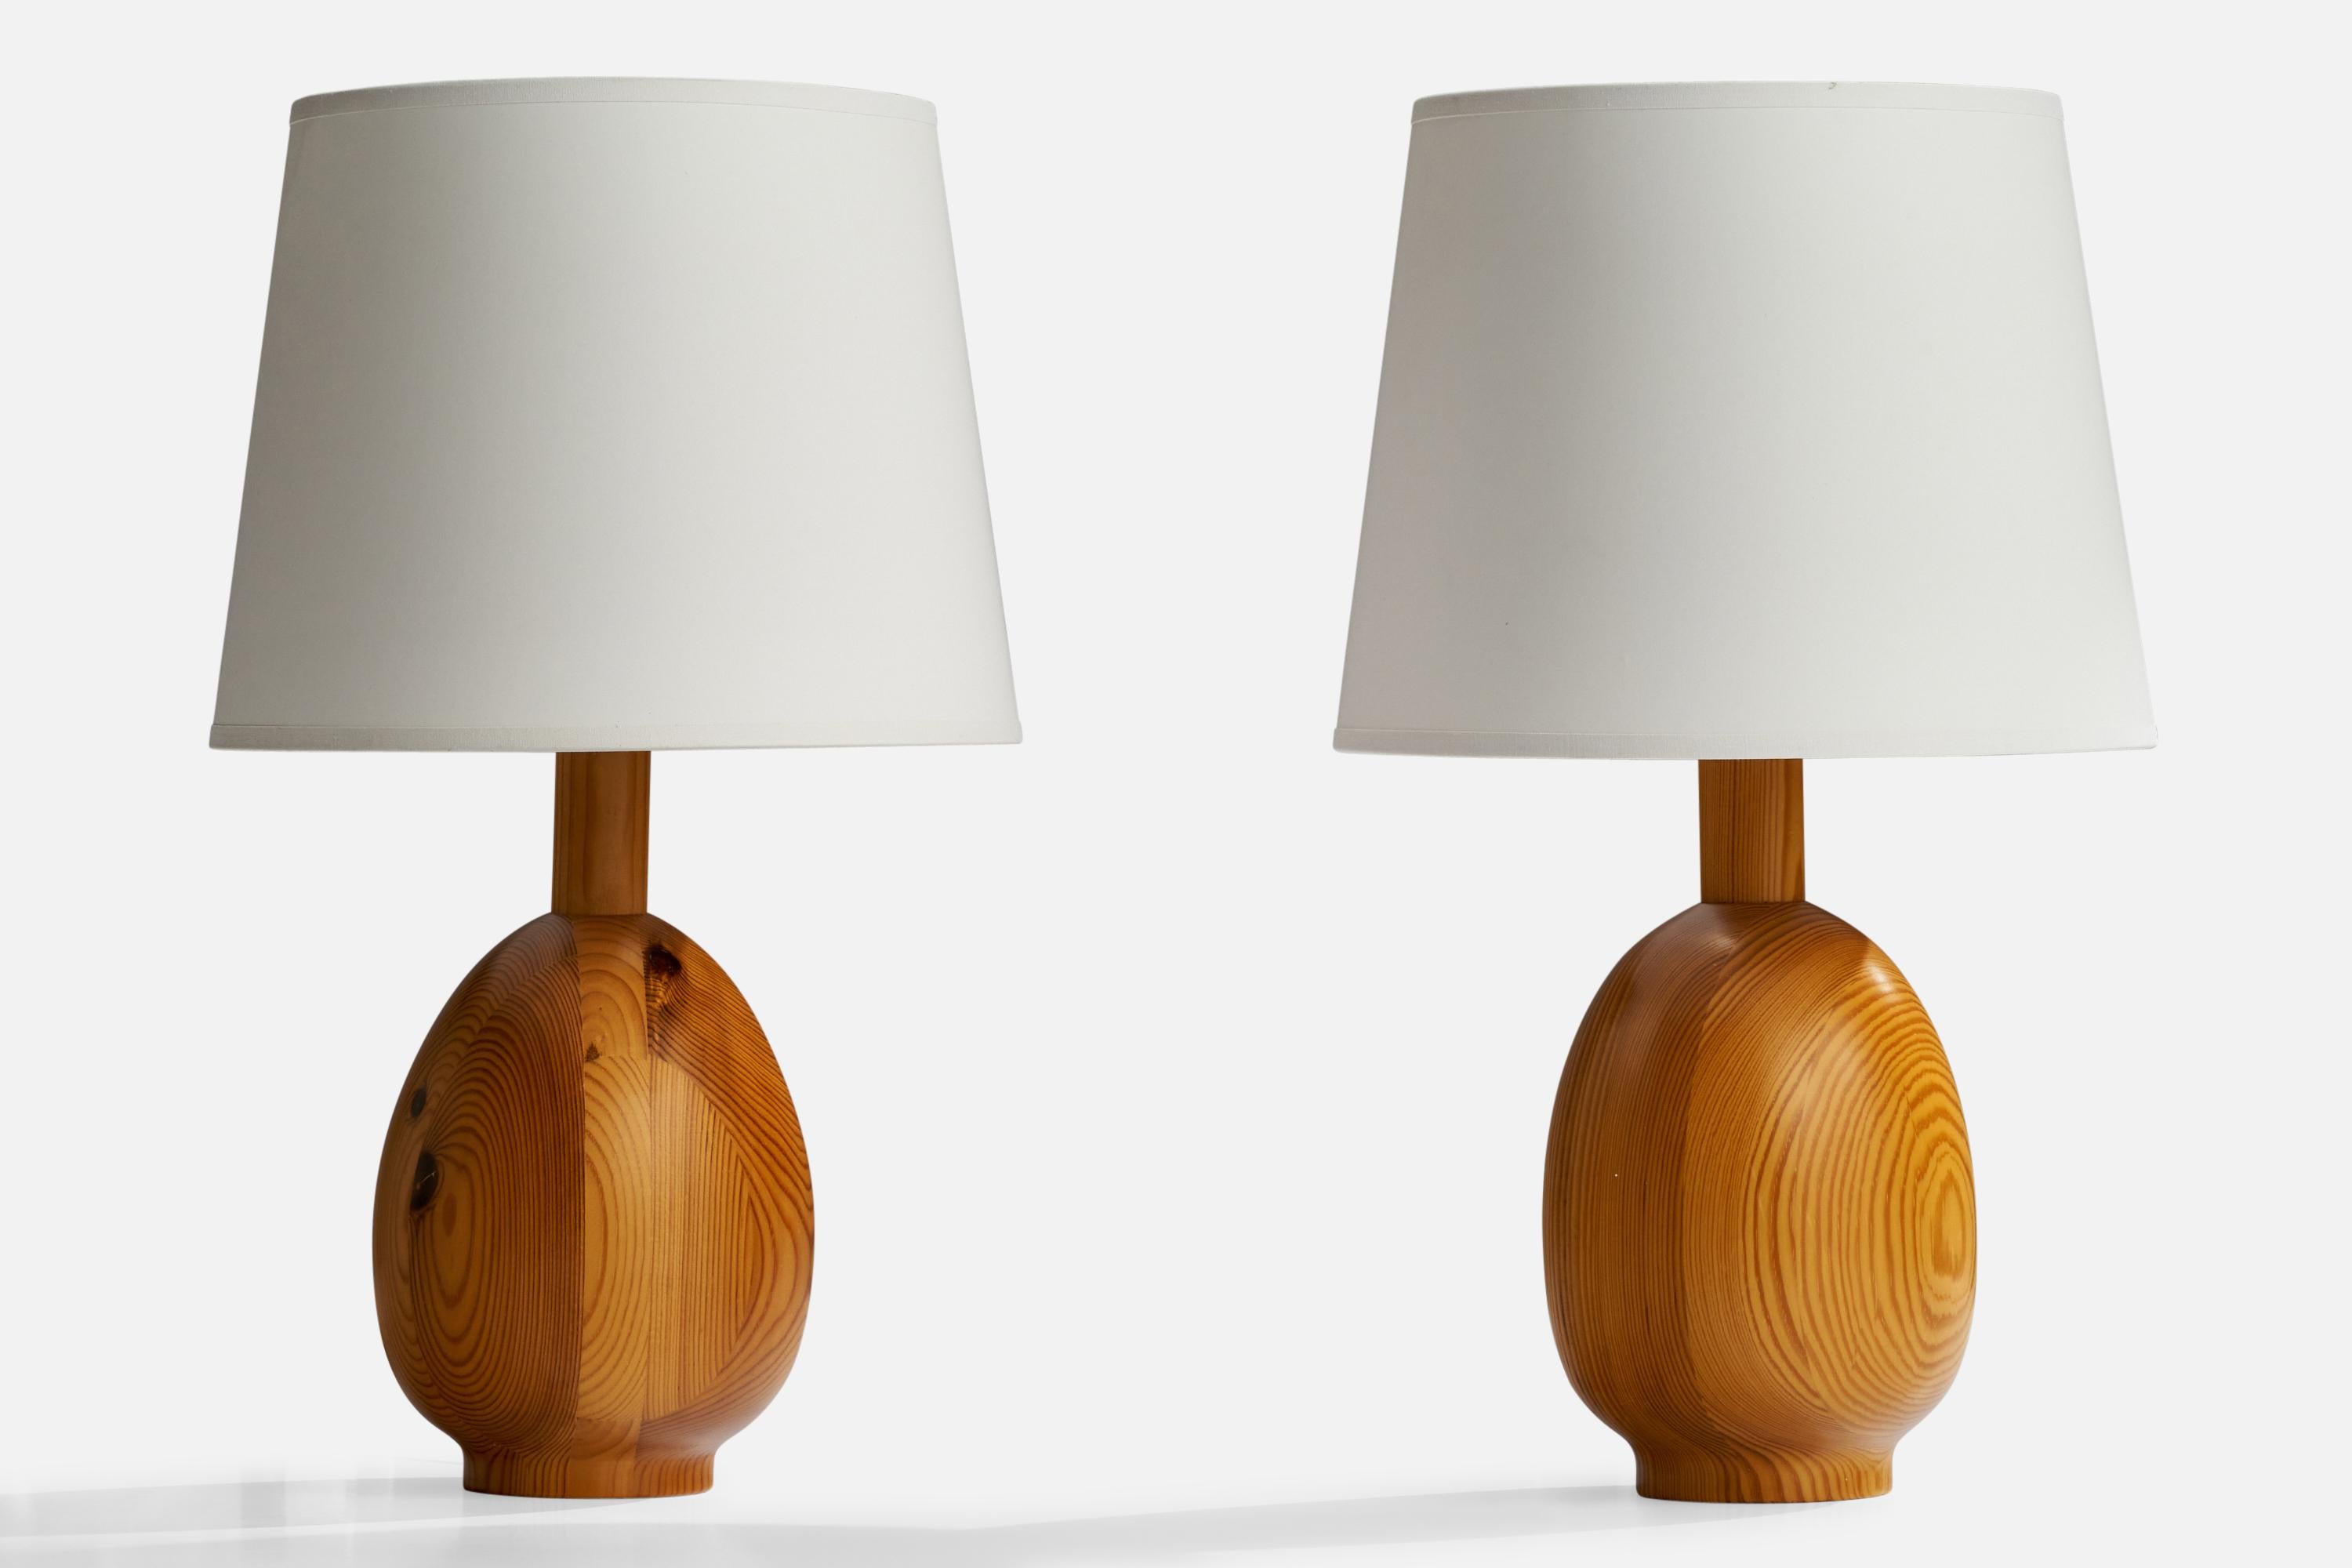 A pair of pine table lamps designed and produced by Markslöjd, Sweden, c. 1970s.

Dimensions of Lamp (inches): 11.5” H x 5” Diameter
Dimensions of Shade (inches): 8”  Top Diameter x 10” Bottom Diameter x 8” H
Dimensions of Lamp with Shade (inches):